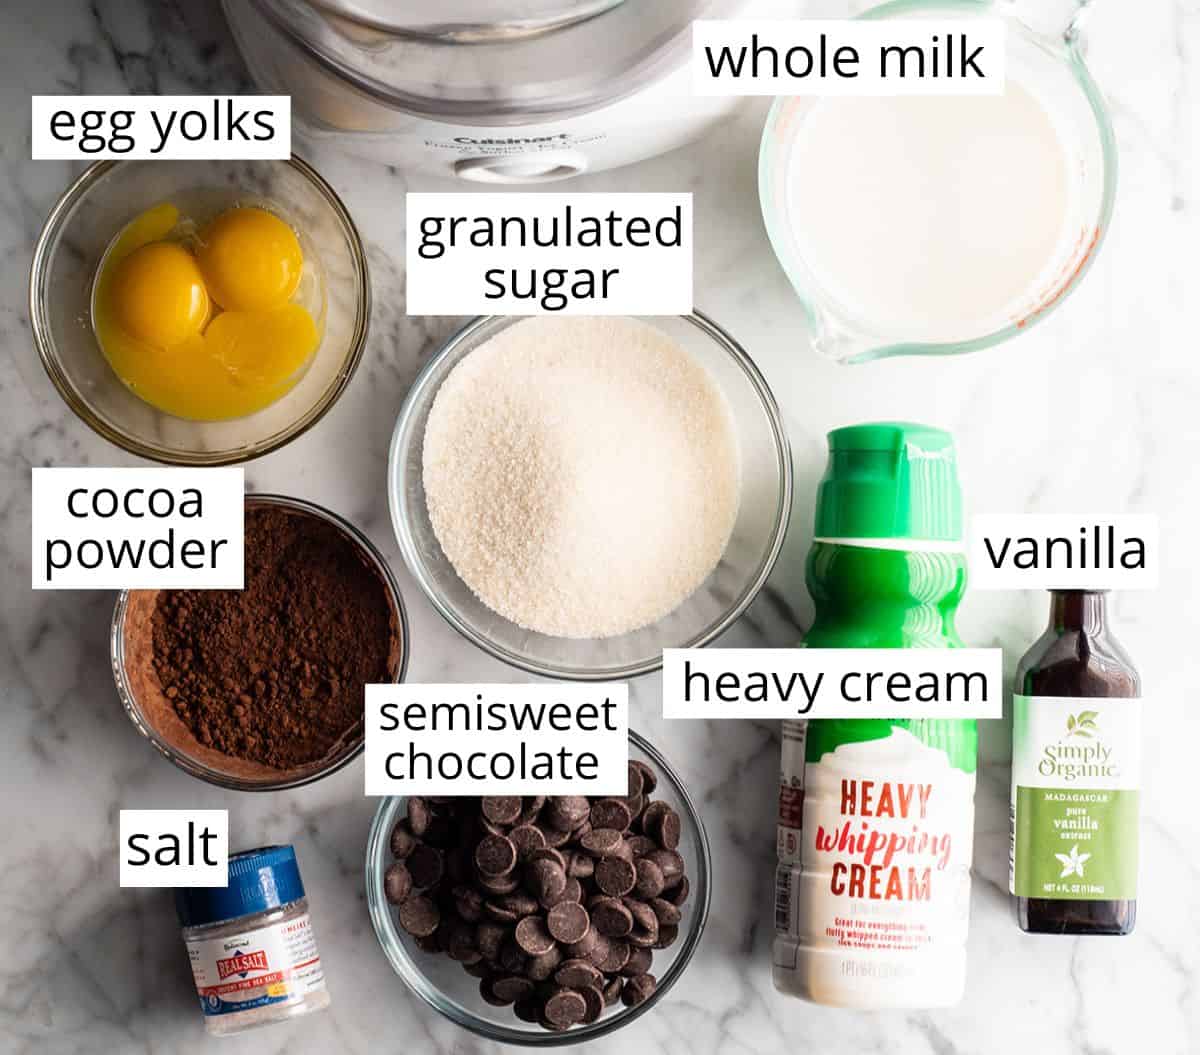 Overhead view of the labeled ingredients in this chocolate ice cream recipe